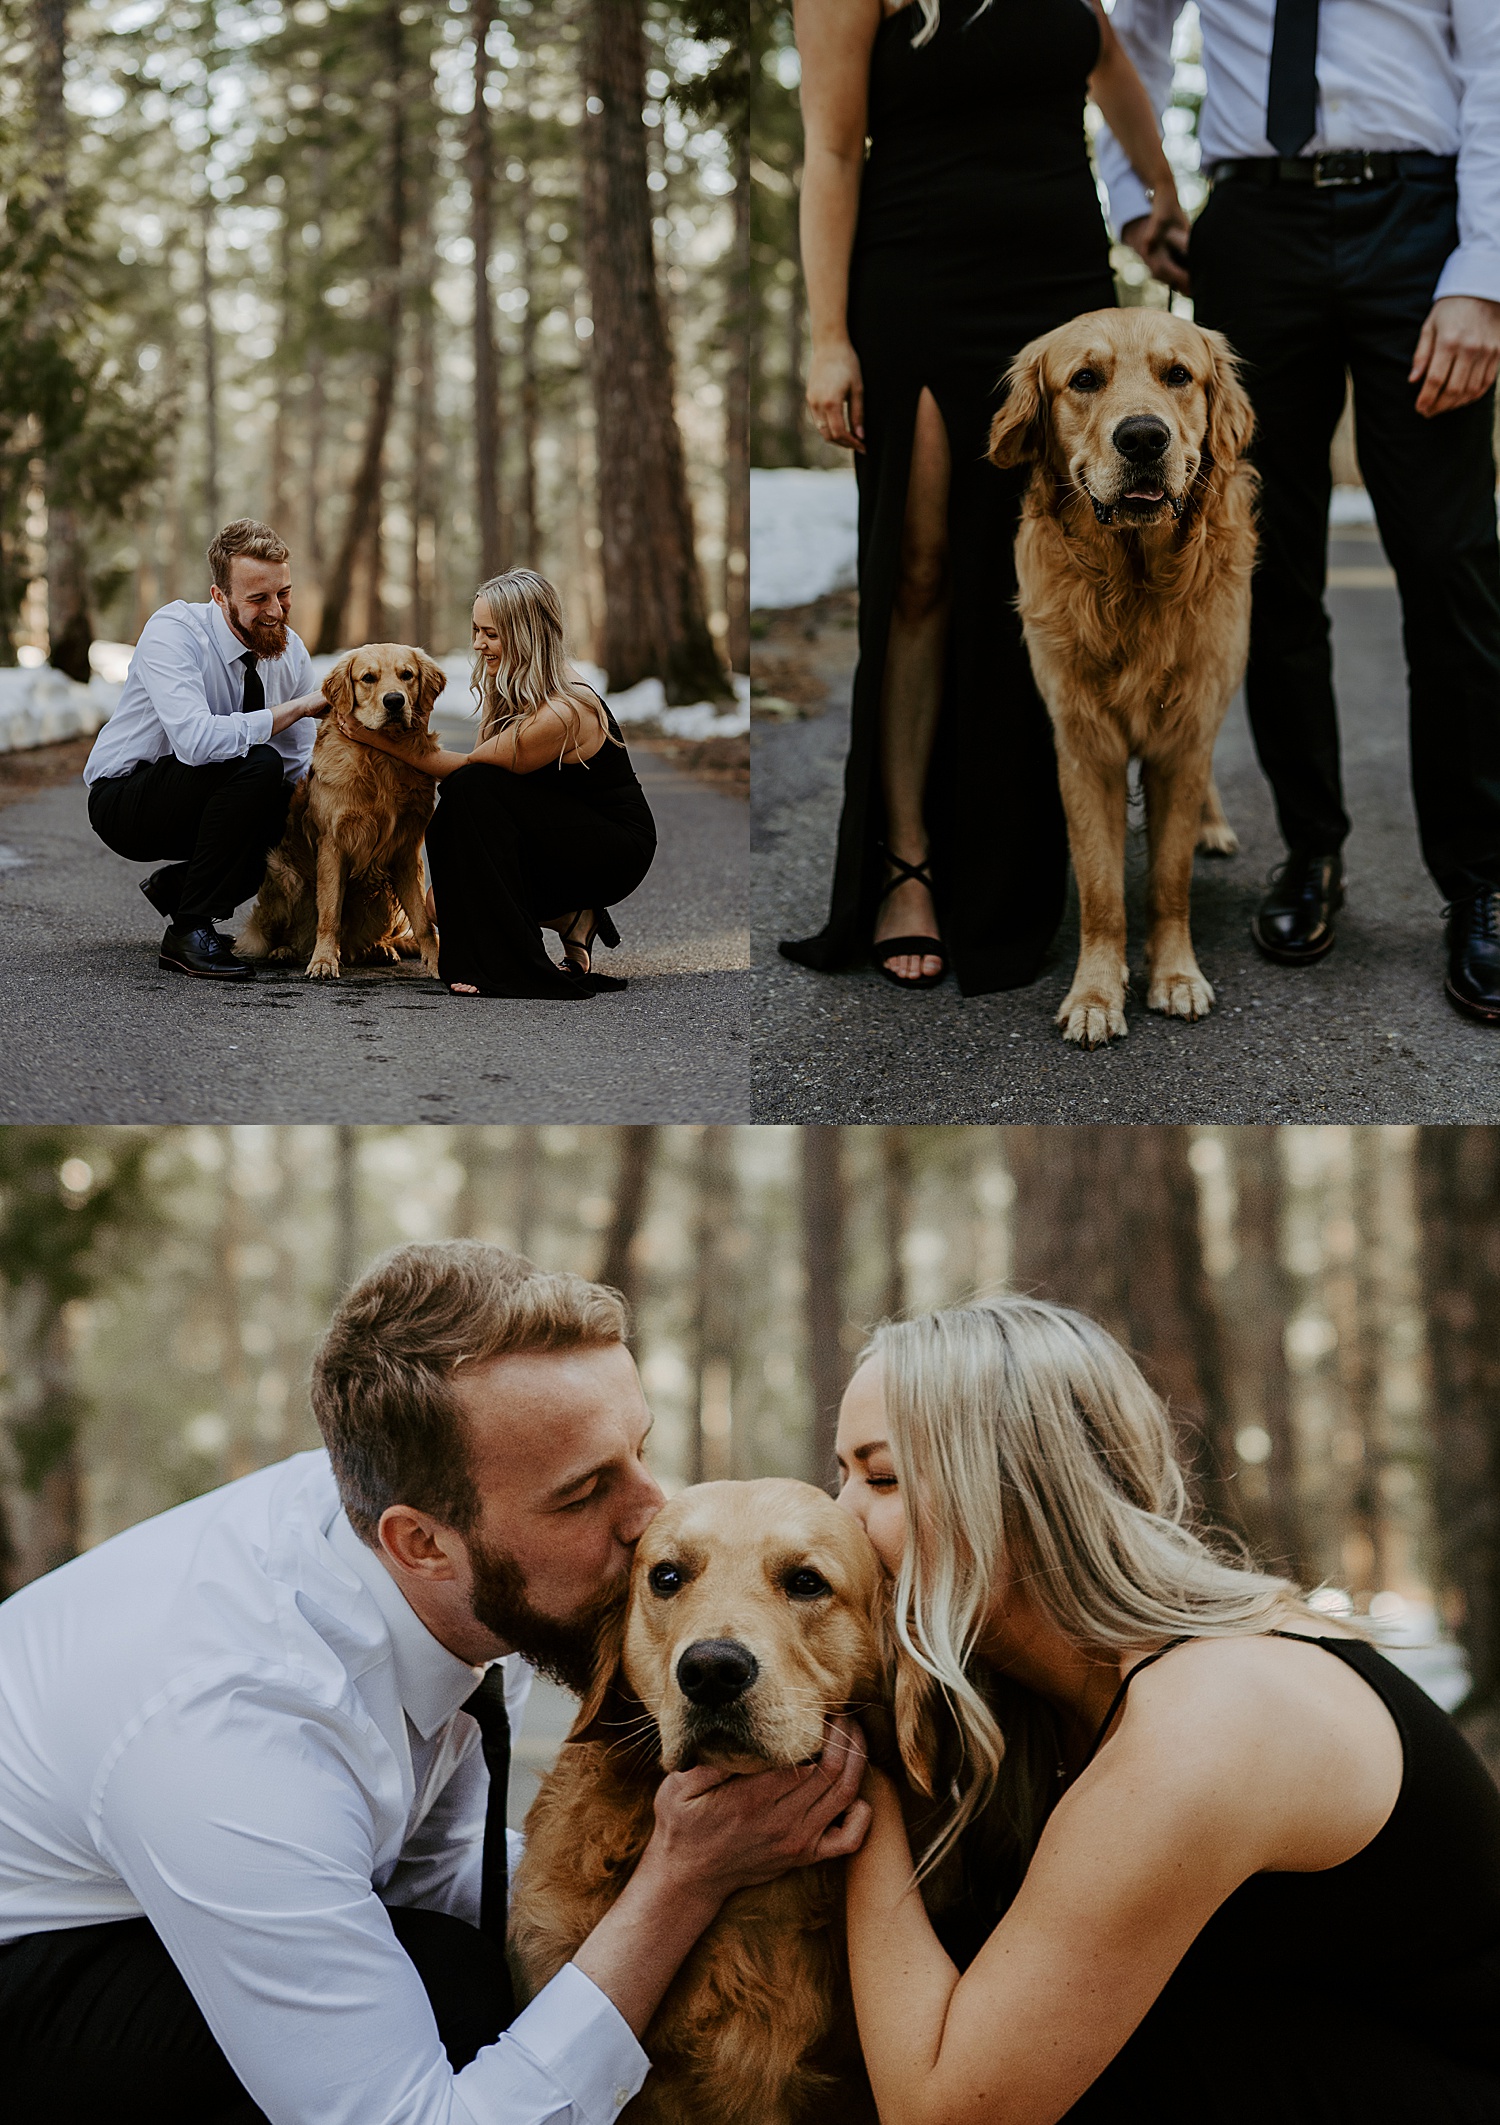 engaged couple posing with their golden retriever for photos